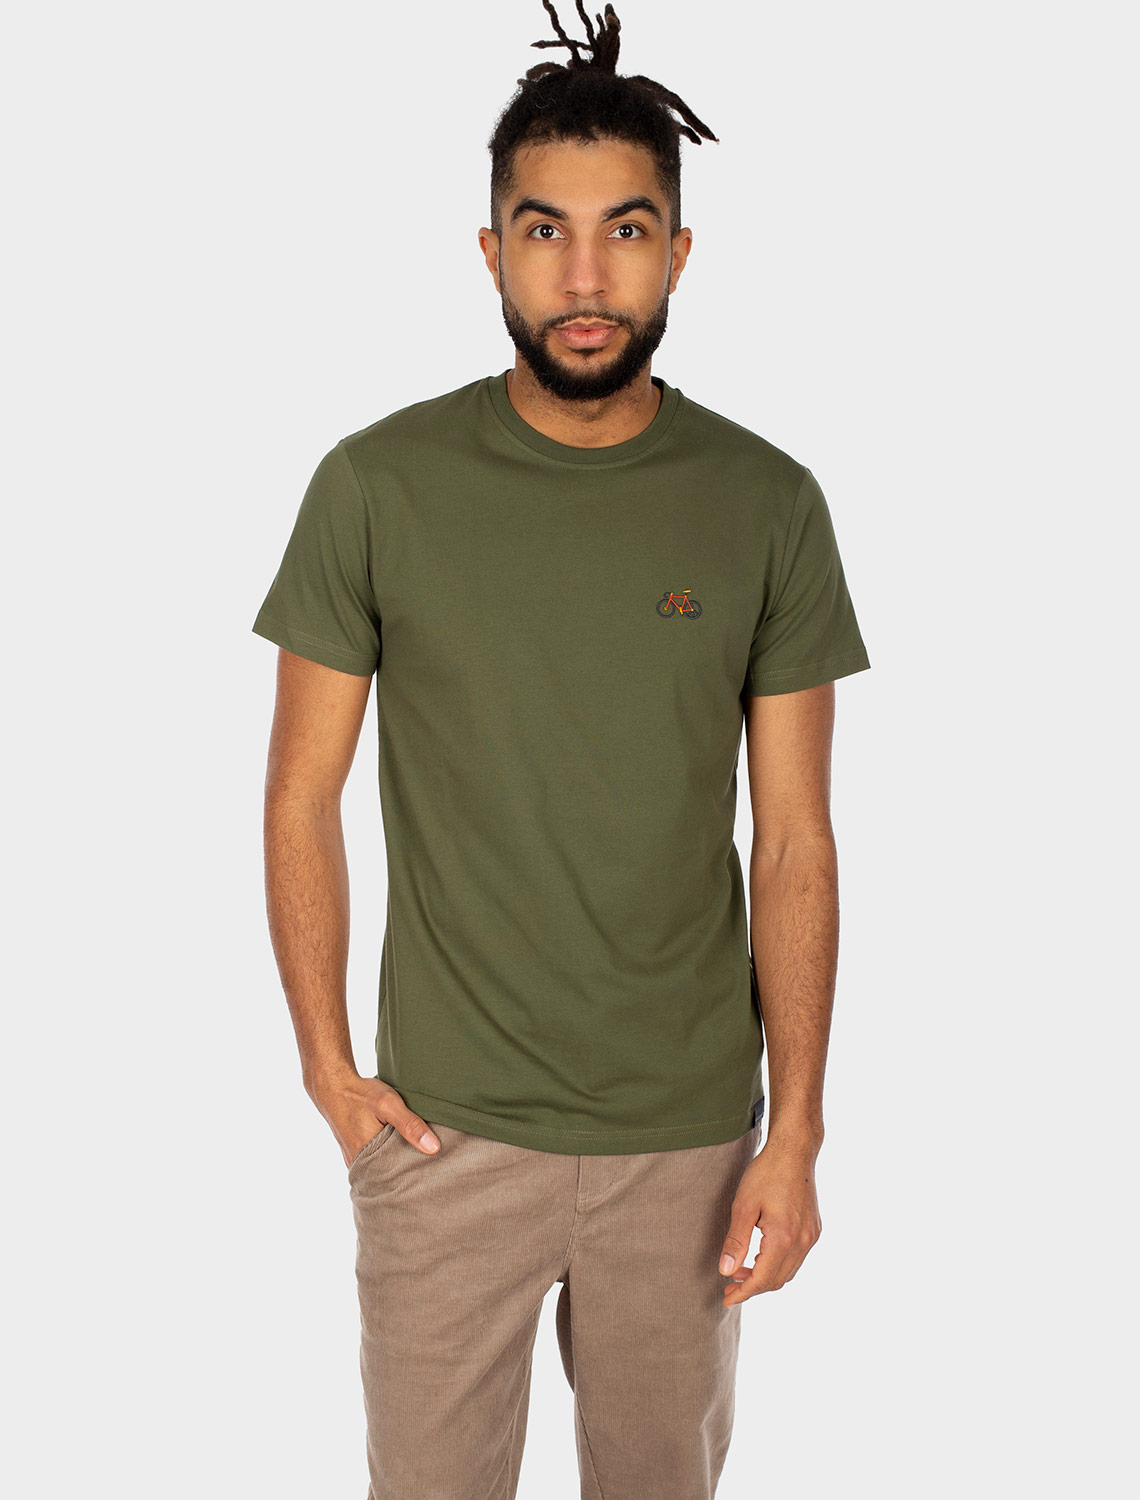 IRIE-DAILY-PEACERIDE-EMB-TEE-T-Shirt-d-olive4